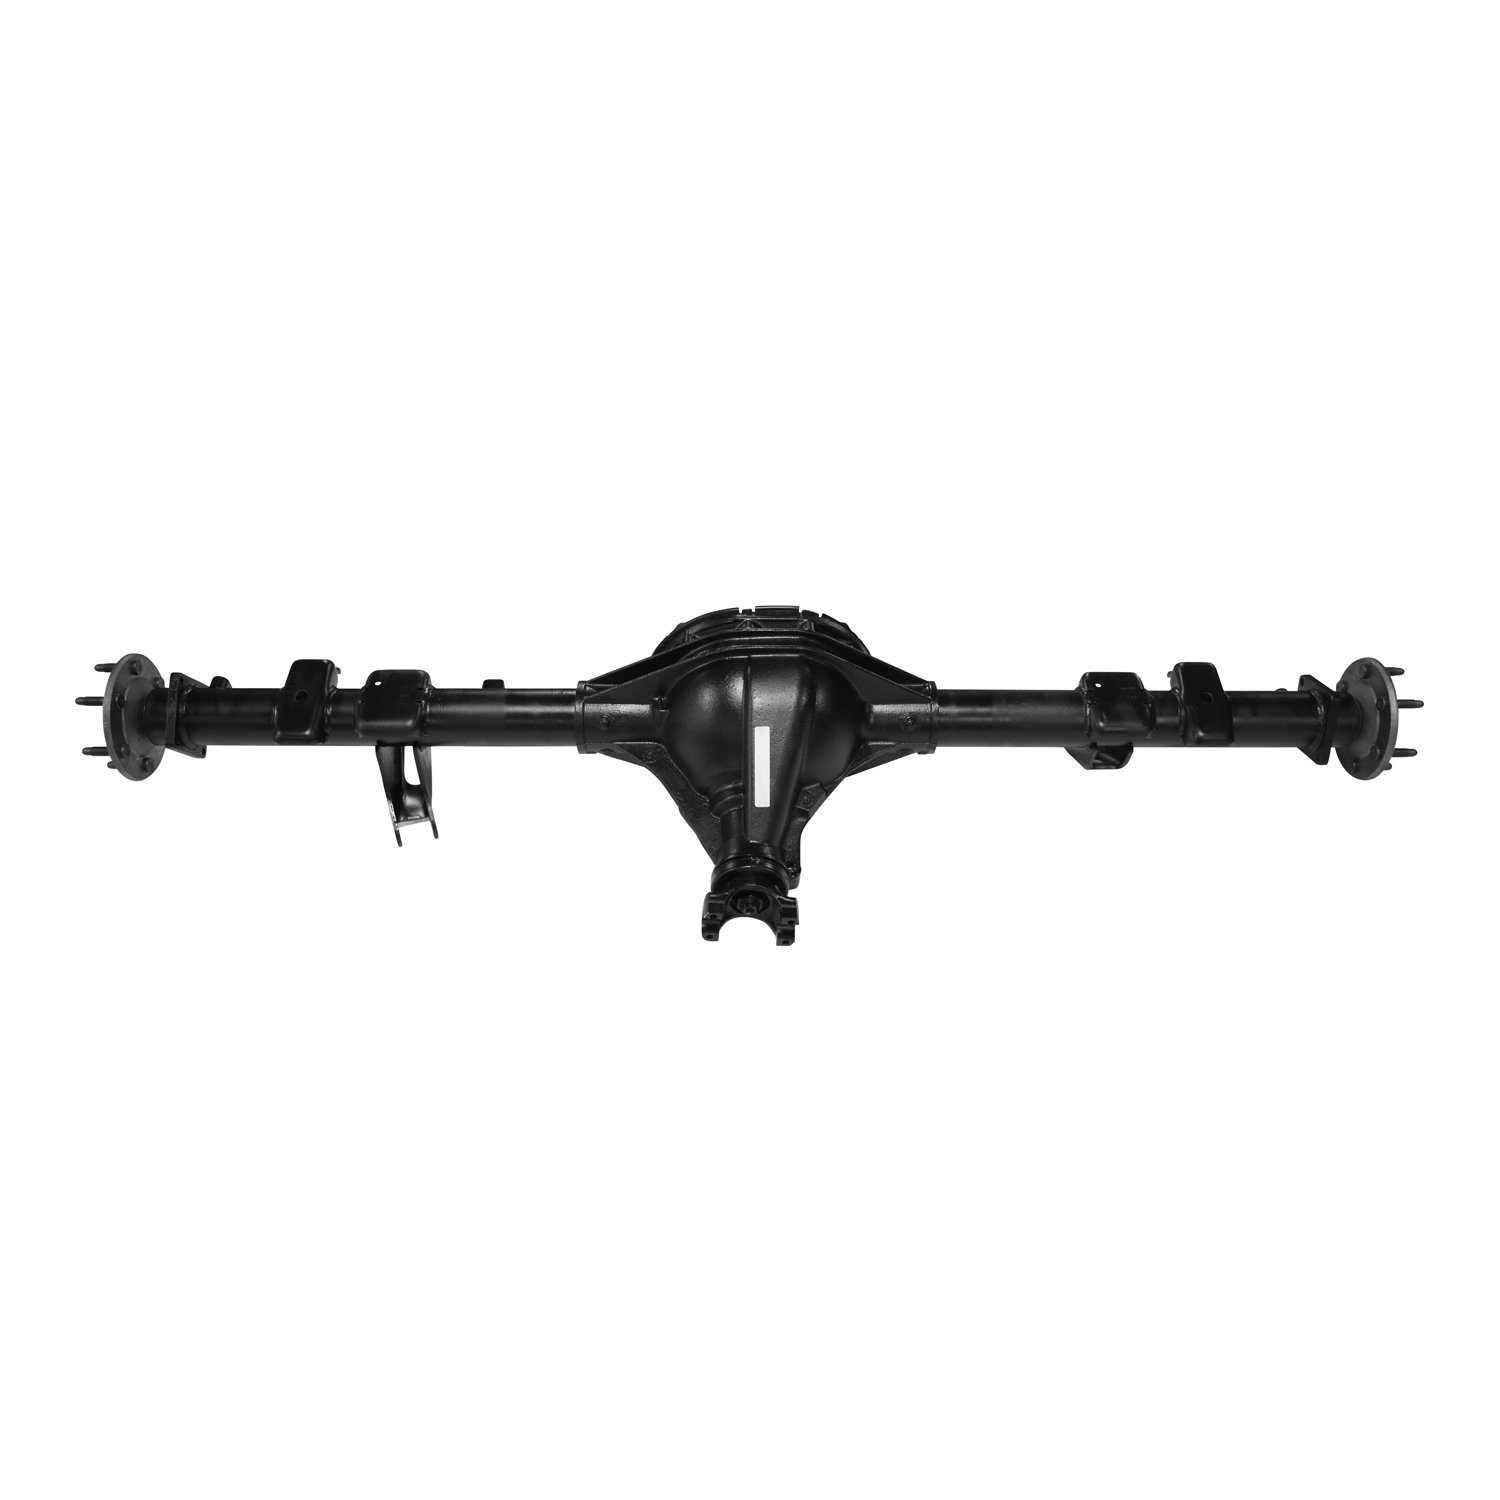 Remanufactured 9.5" Rear diff Axle Assembly for 2014-18 GM 1500 With 3.08 Gear Ratio, Posi